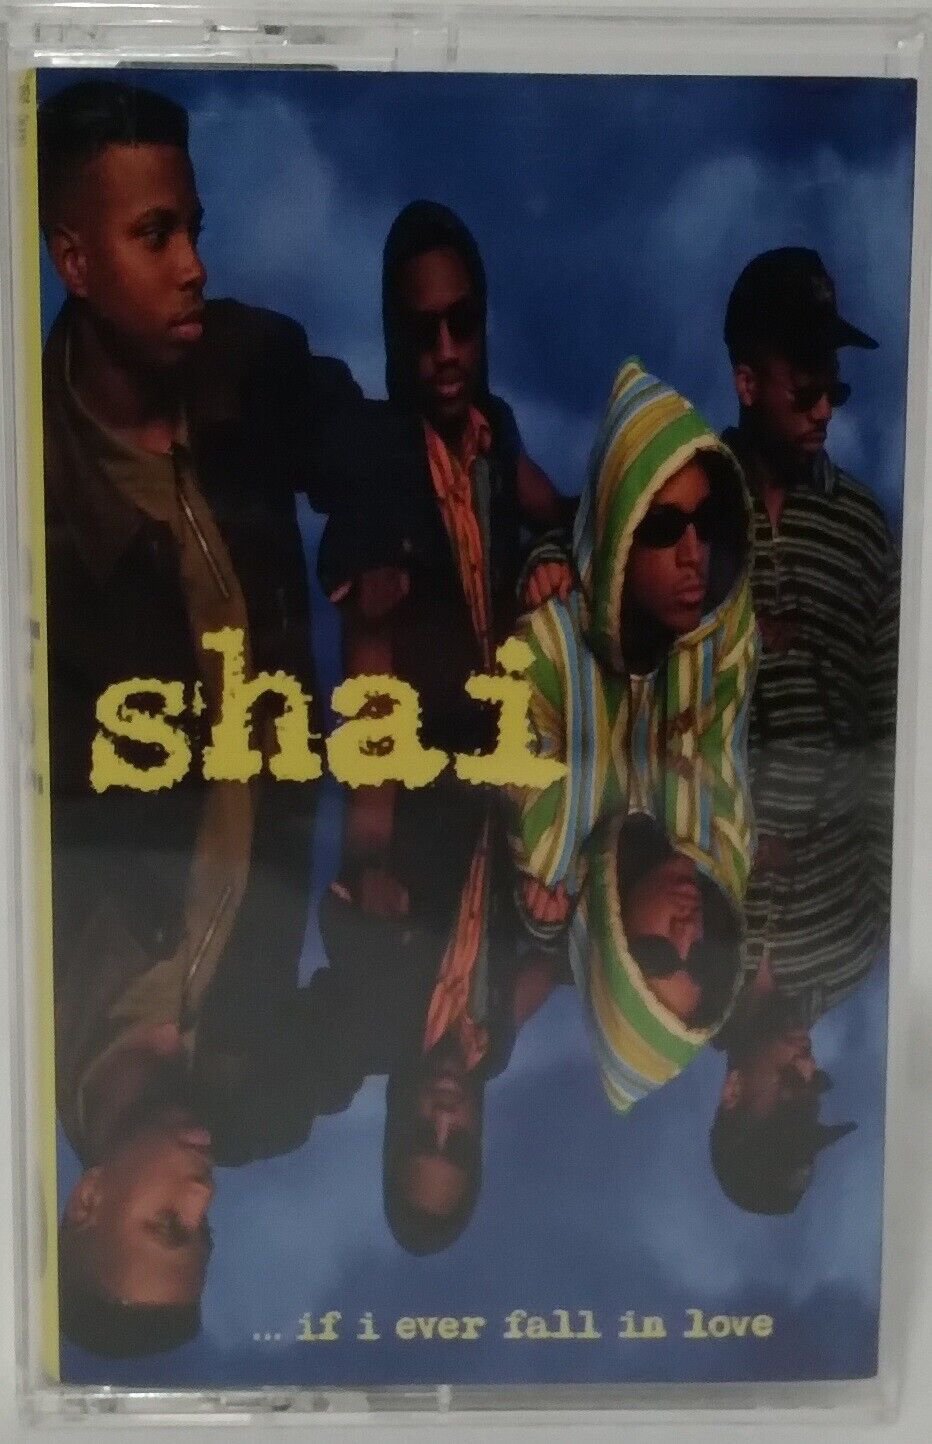 If I Ever Fall In Love by Shai (Cassette, 1992, Gasoline Alley)